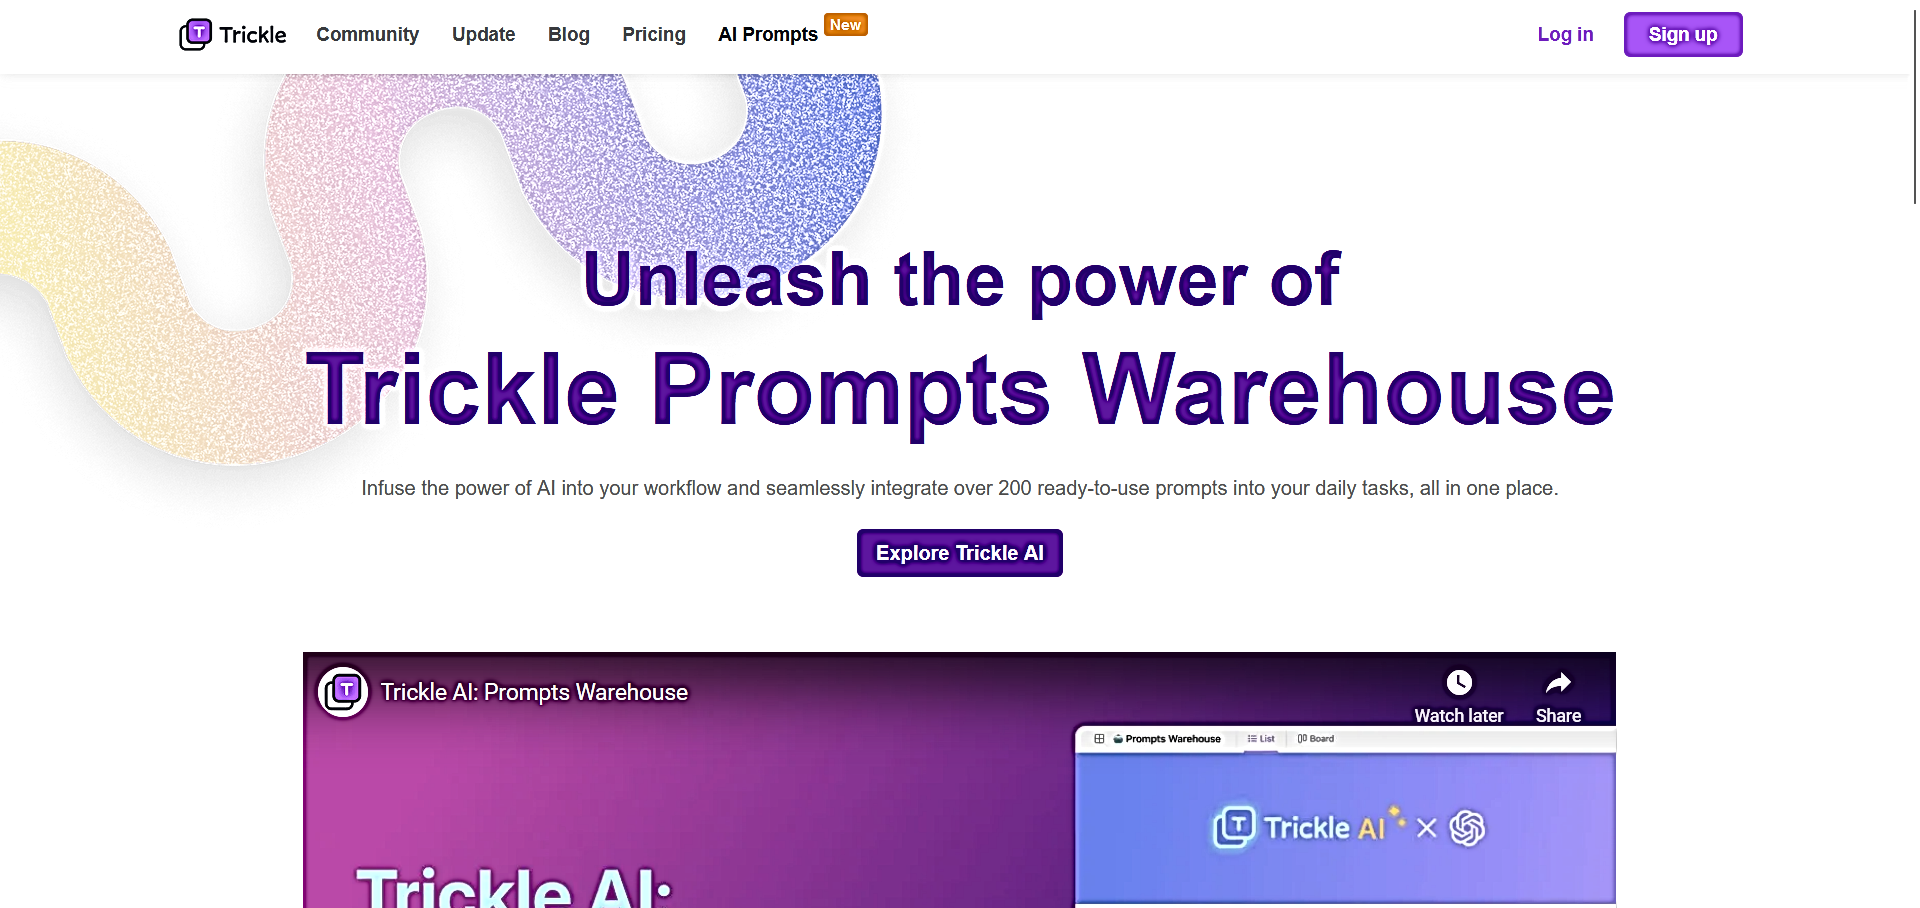 Trickle: Prompts Warehouse featured